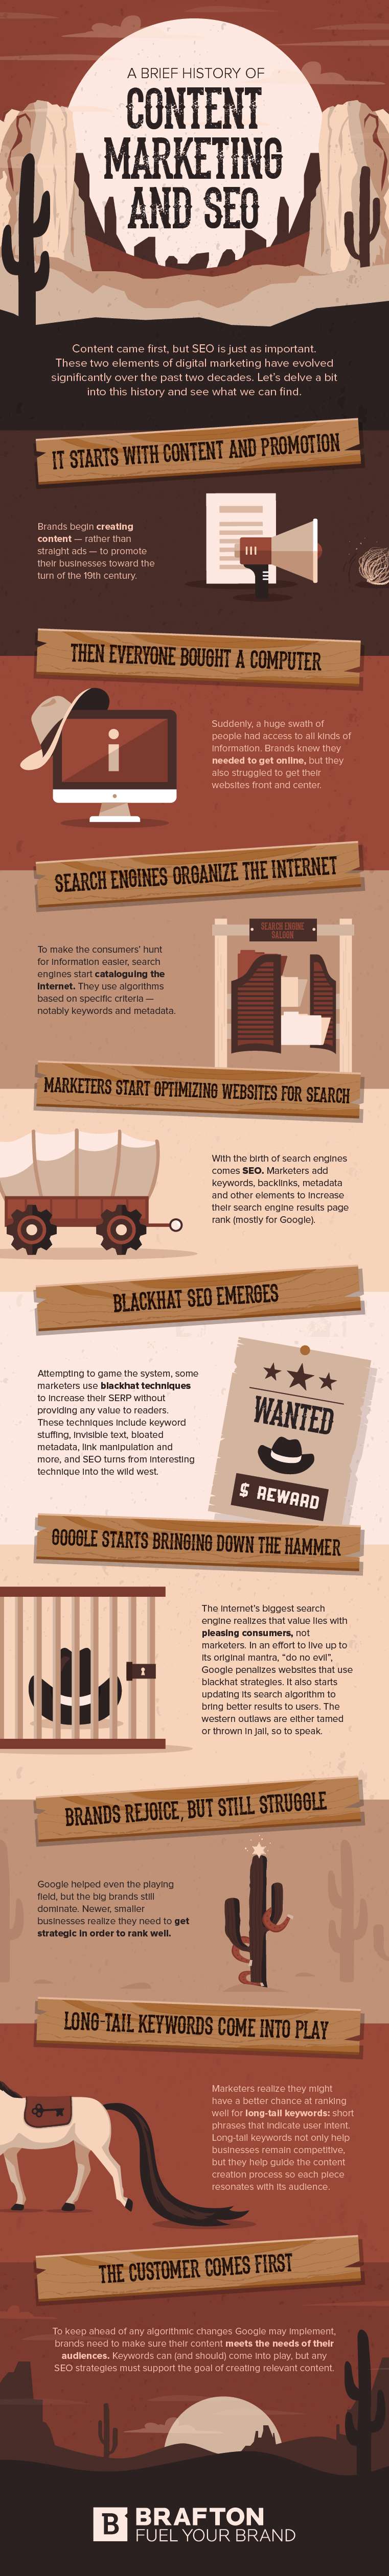 evolution of content marketing and seo infographic